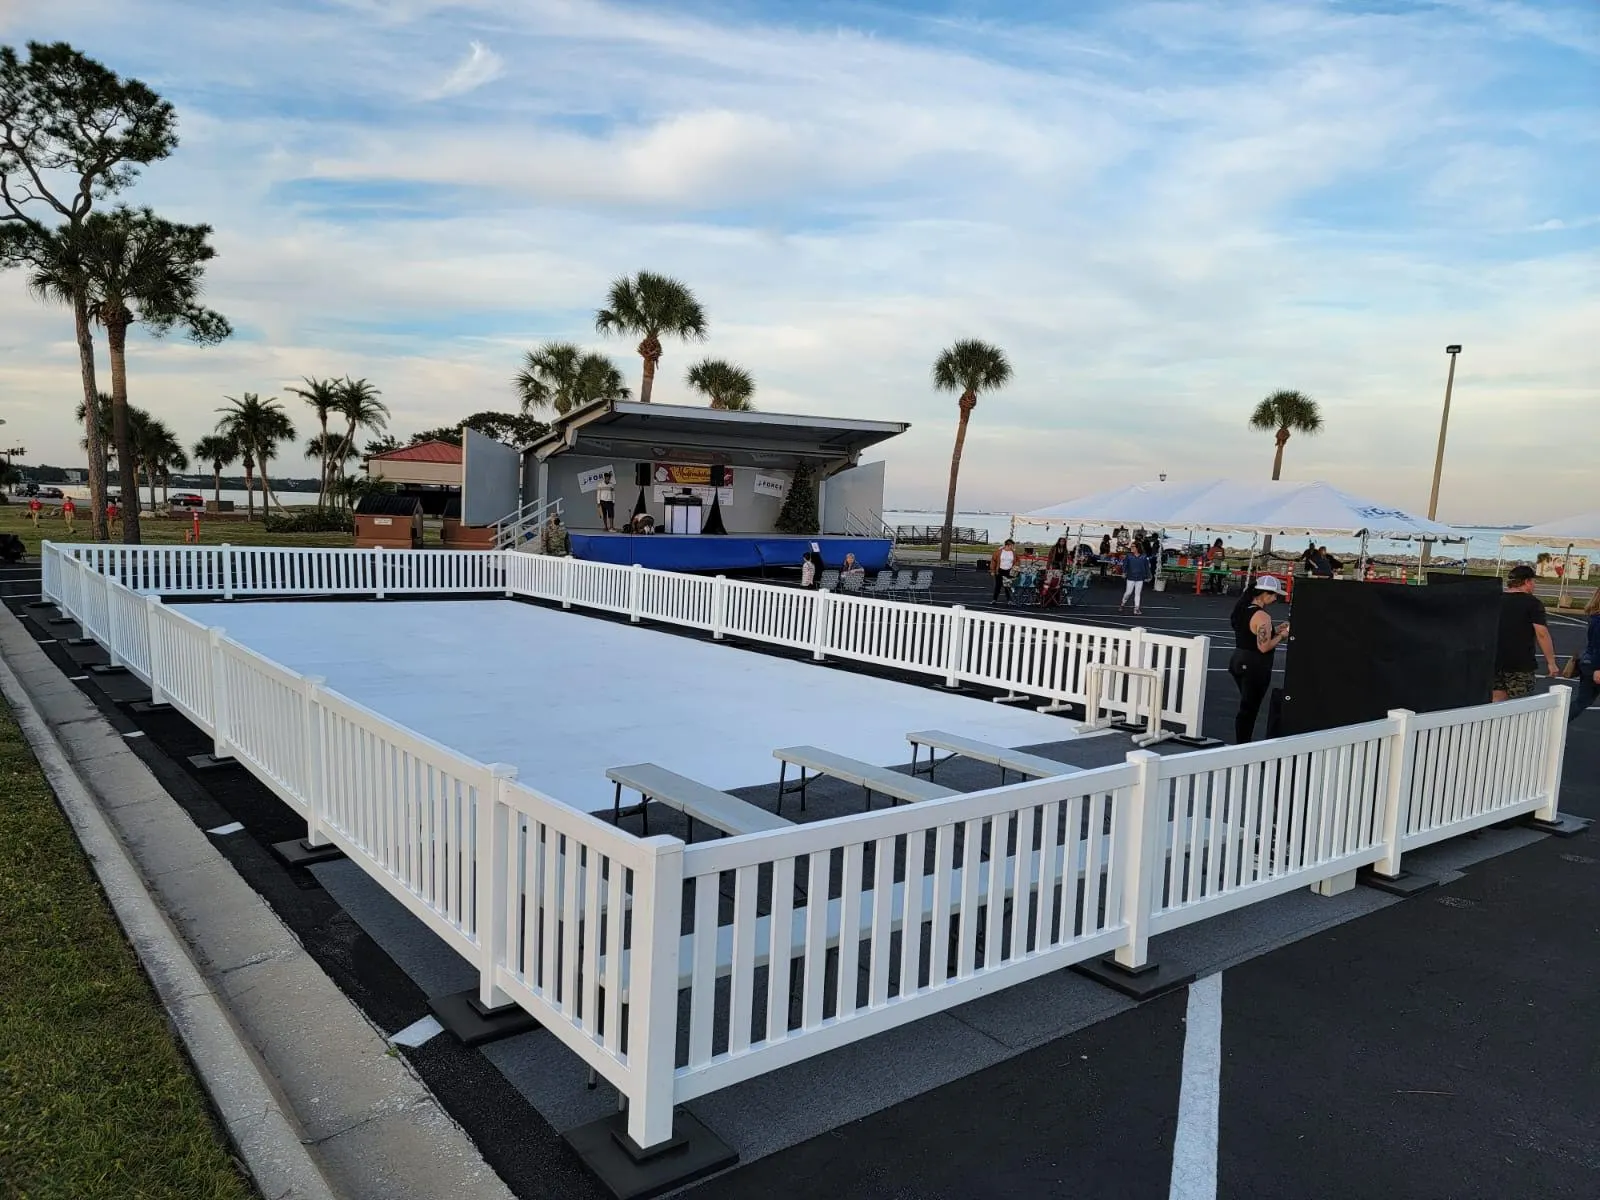 Outdoor ice rink with white fence next to palm trees, festival stage and tents.